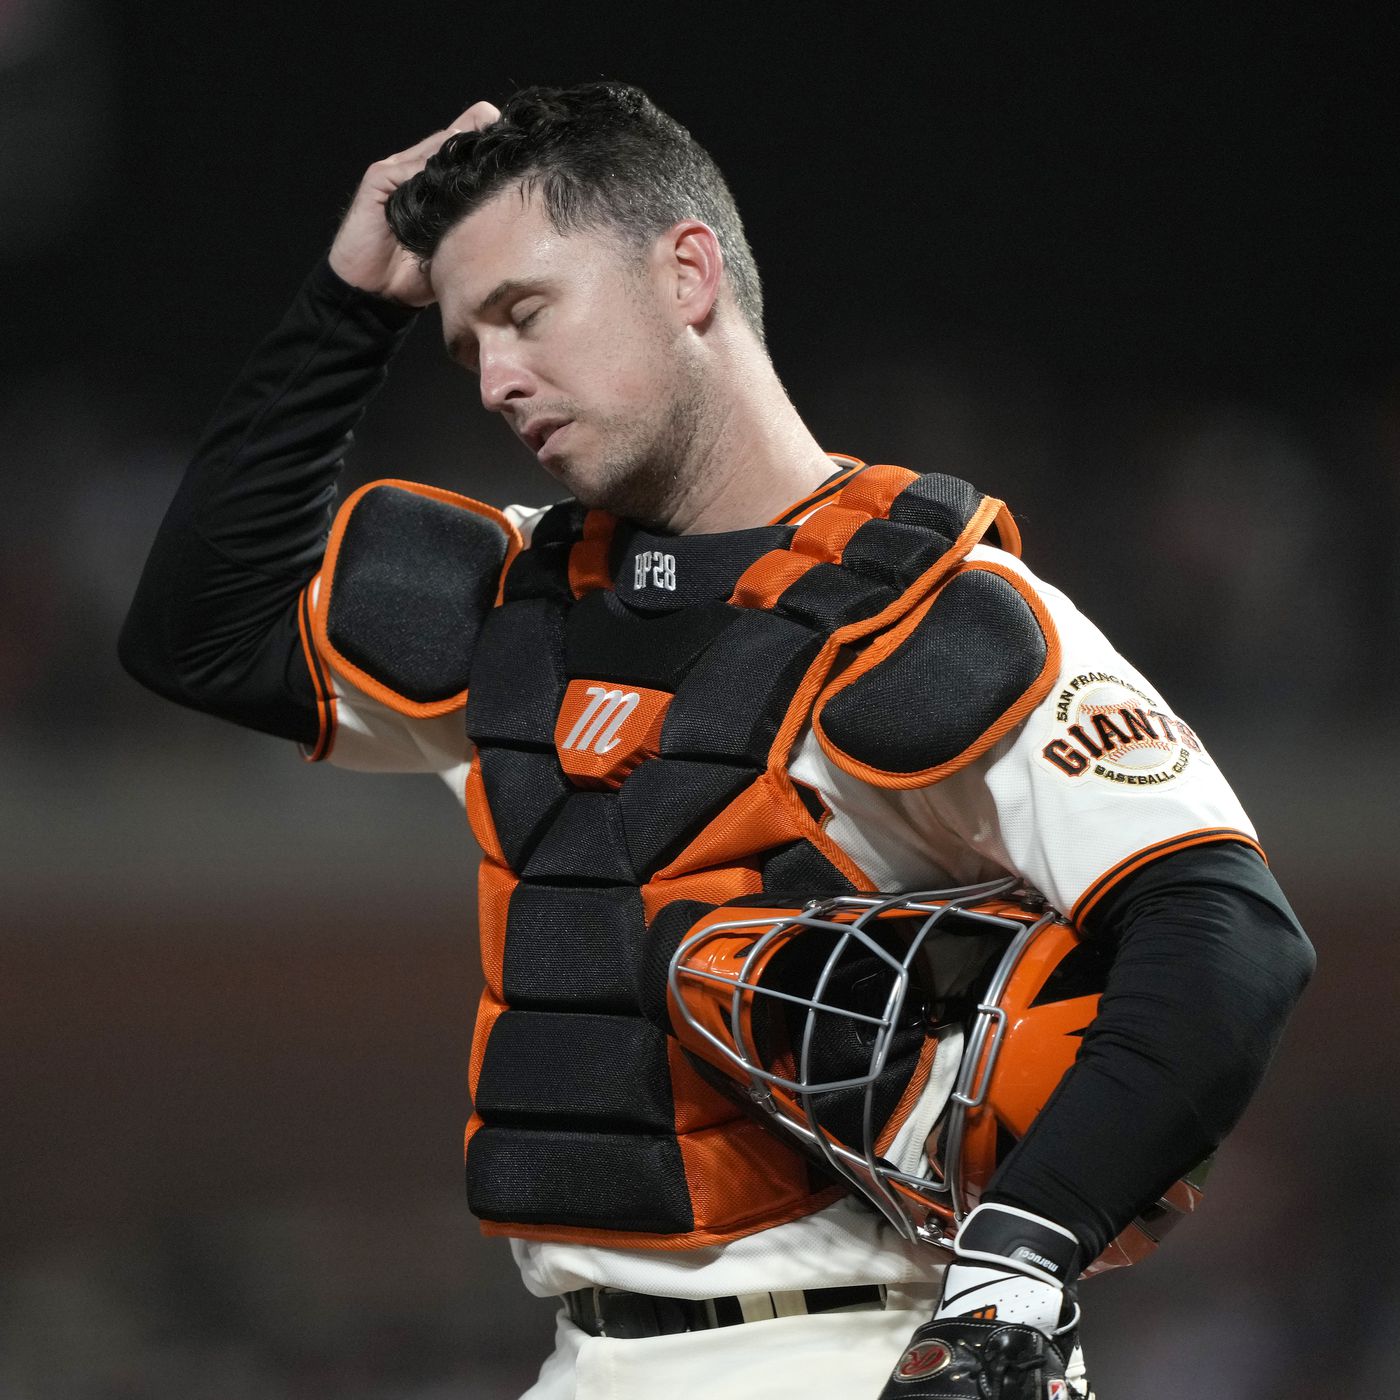 Buster Posey - The Most Important San Francisco Giants Roster